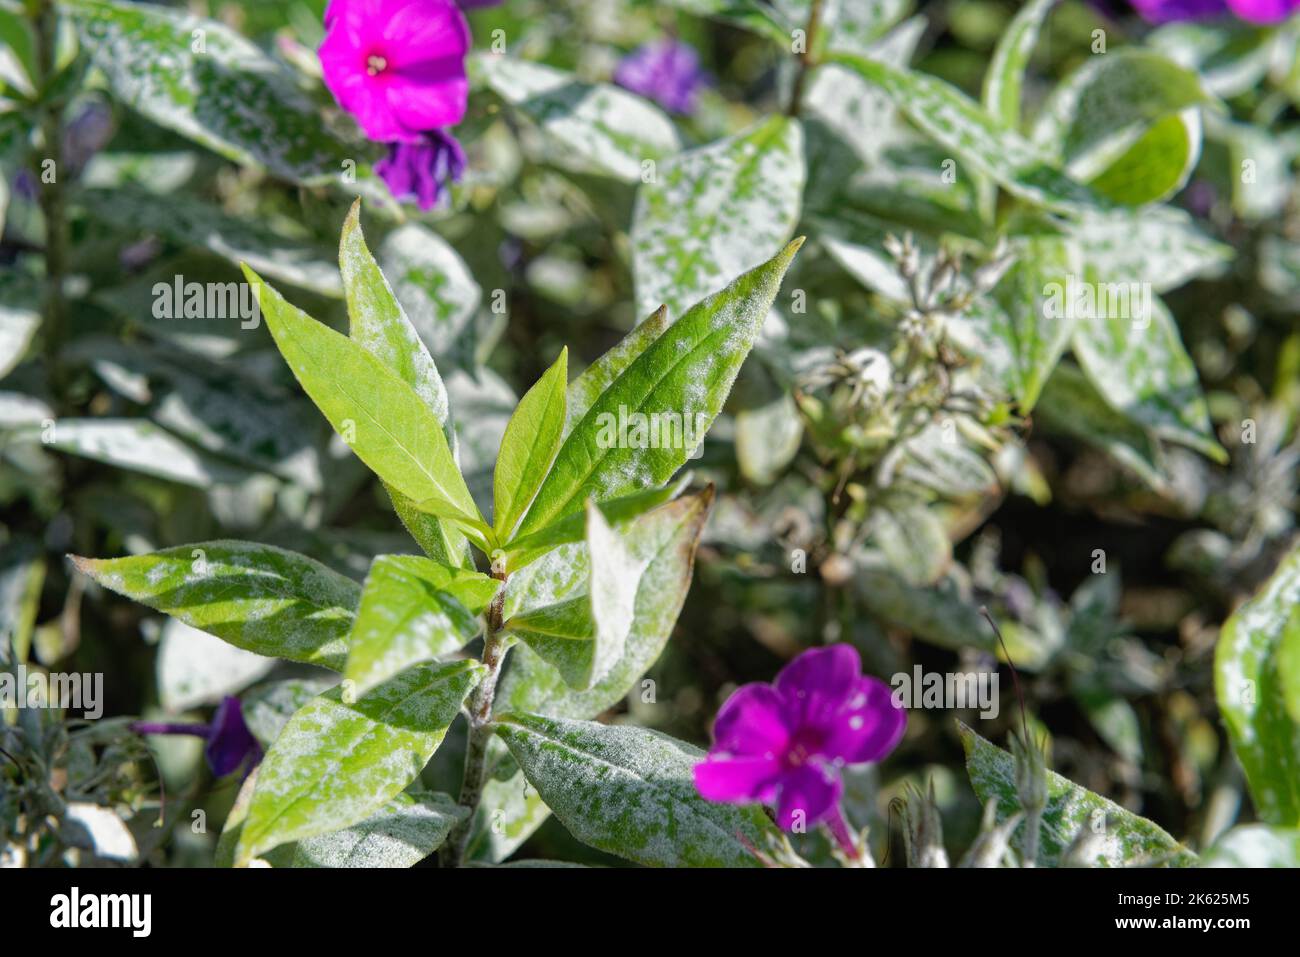 A flowering phlox plant infected with a severe case of powdery mildew in a garden bed Stock Photo